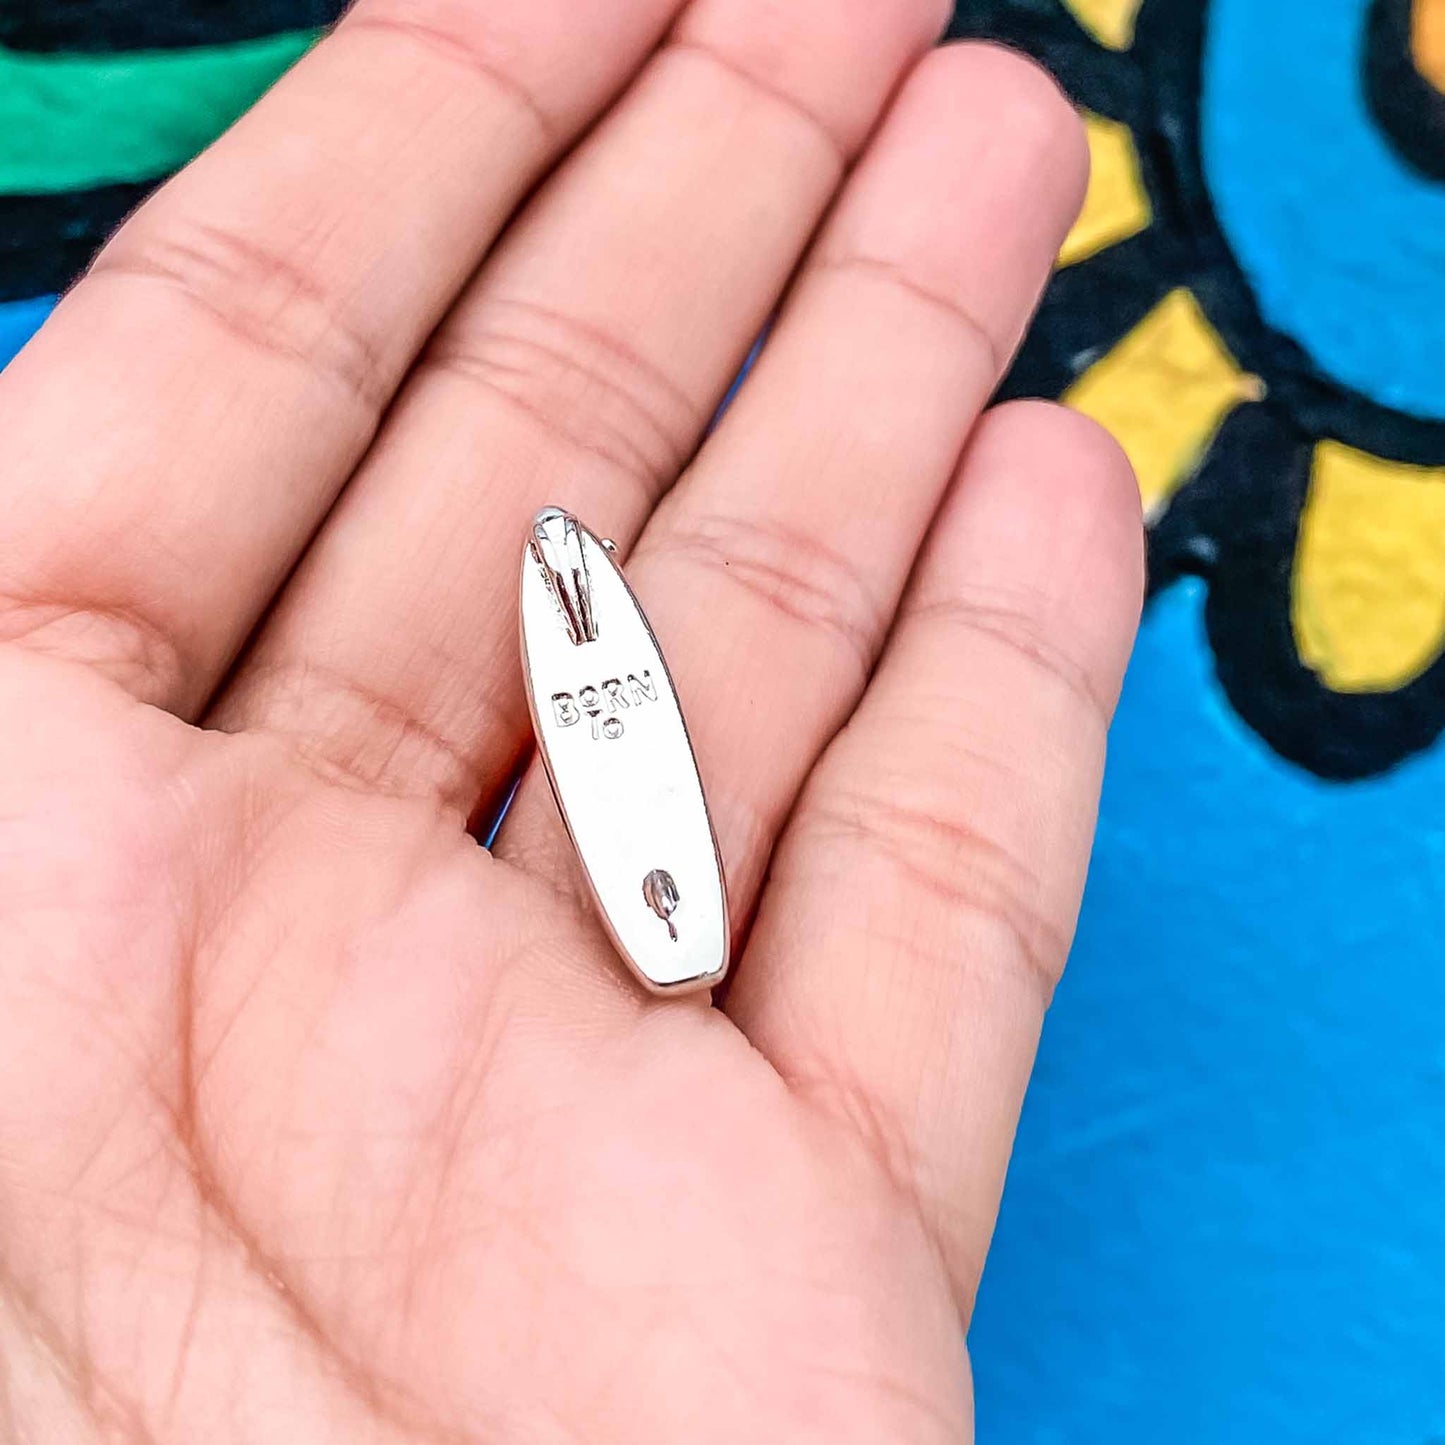 Looking for places to buy or rent a paddle board? This stand up paddle board pendant will be the best and highest performance SUP you'll ever find. Take your paddle board with you, even when you're not surfing, racing or touring. Shop August's birthstone SUP jewelry online or at a surf shop near you